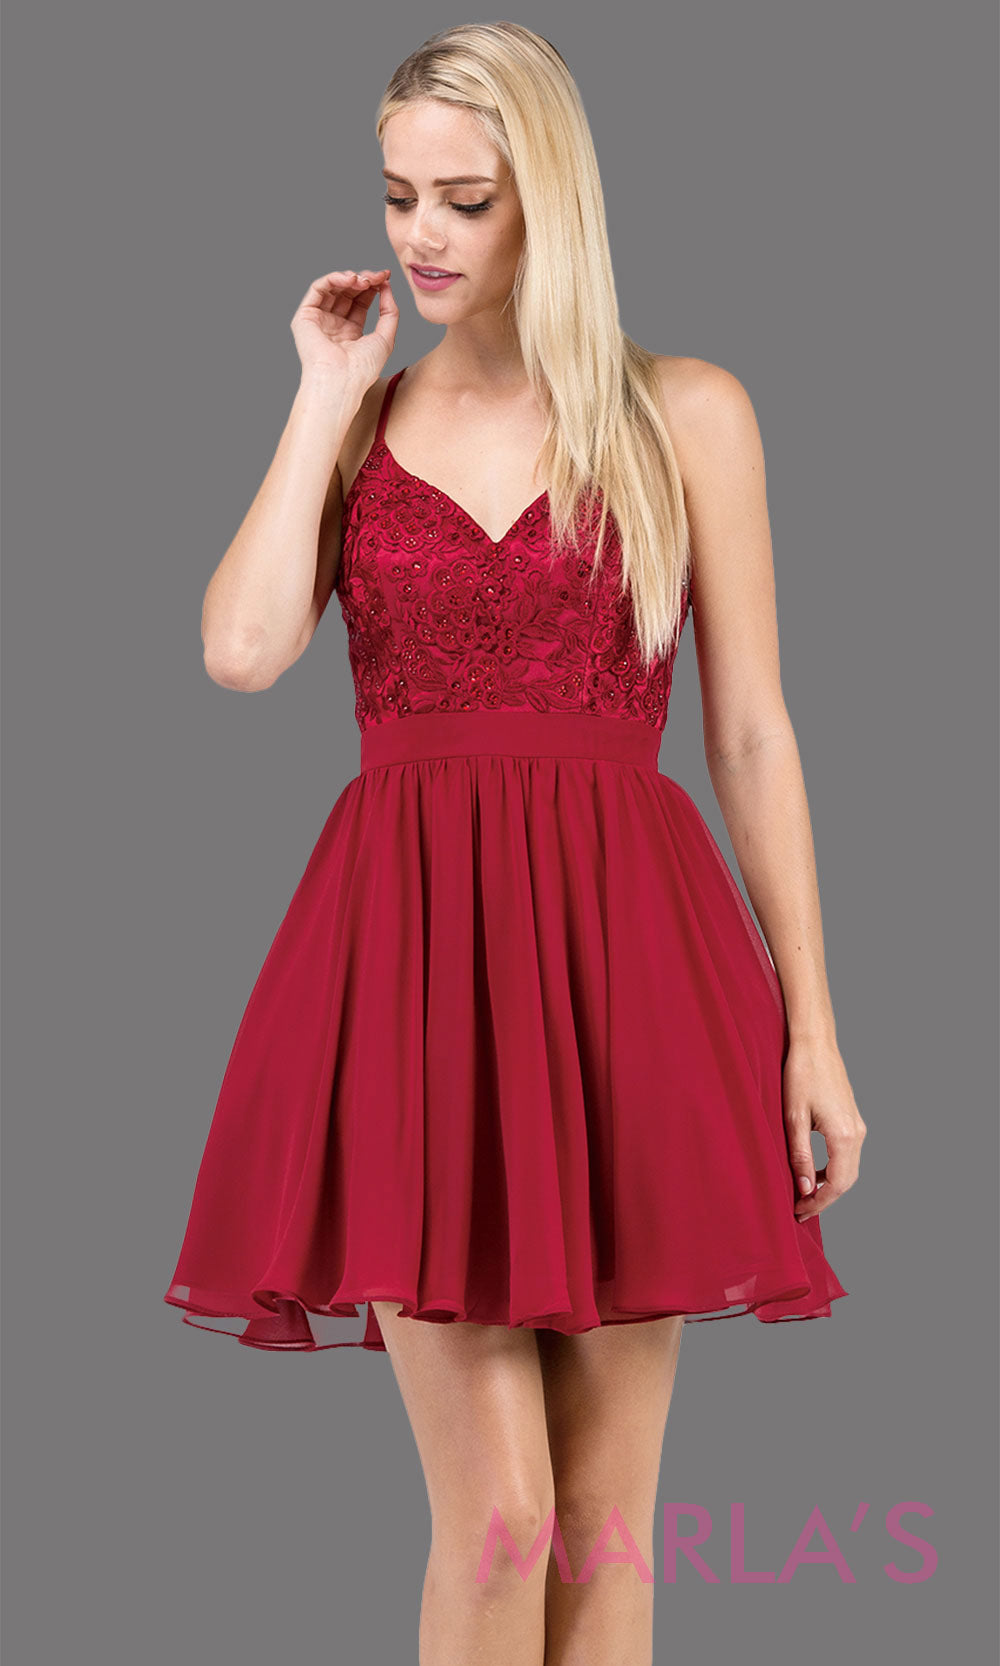 3088.4-Short burgundy red flowy chiffon grade 8 grad dress with straps and lace.This v neck dark red graduation dress is great for quinceanera damas, confirmation,bat mitzvah,junior bridesmaid. Plus size Avail